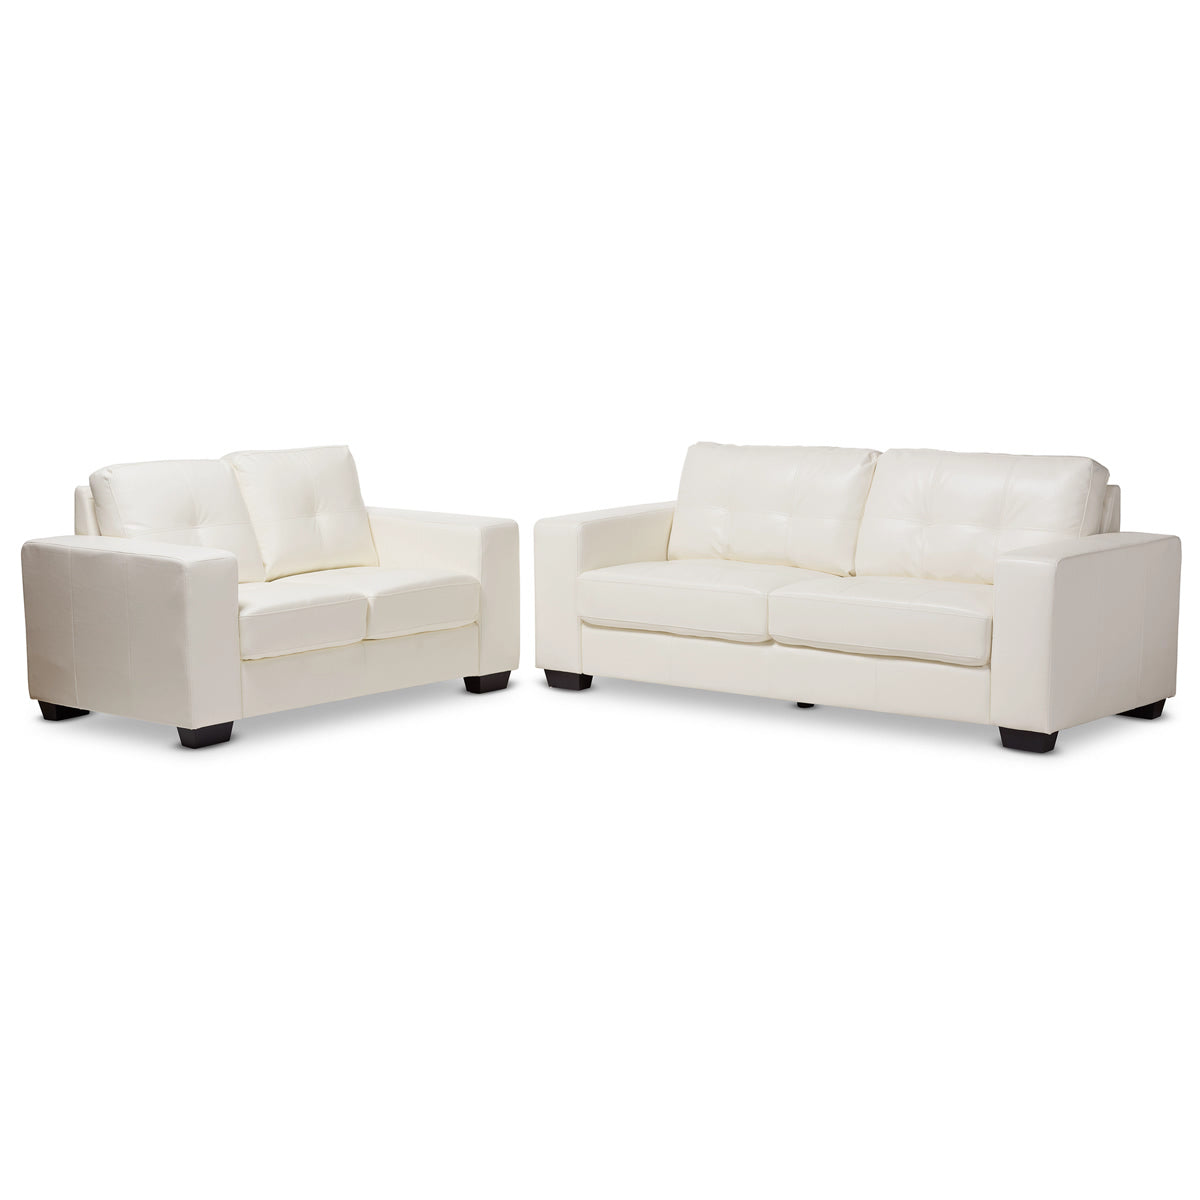 Baxton Studio Adalynn Modern and Contemporary White Faux Leather Upholstered 2-Piece Livingroom Set Baxton Studio-0-Minimal And Modern - 1